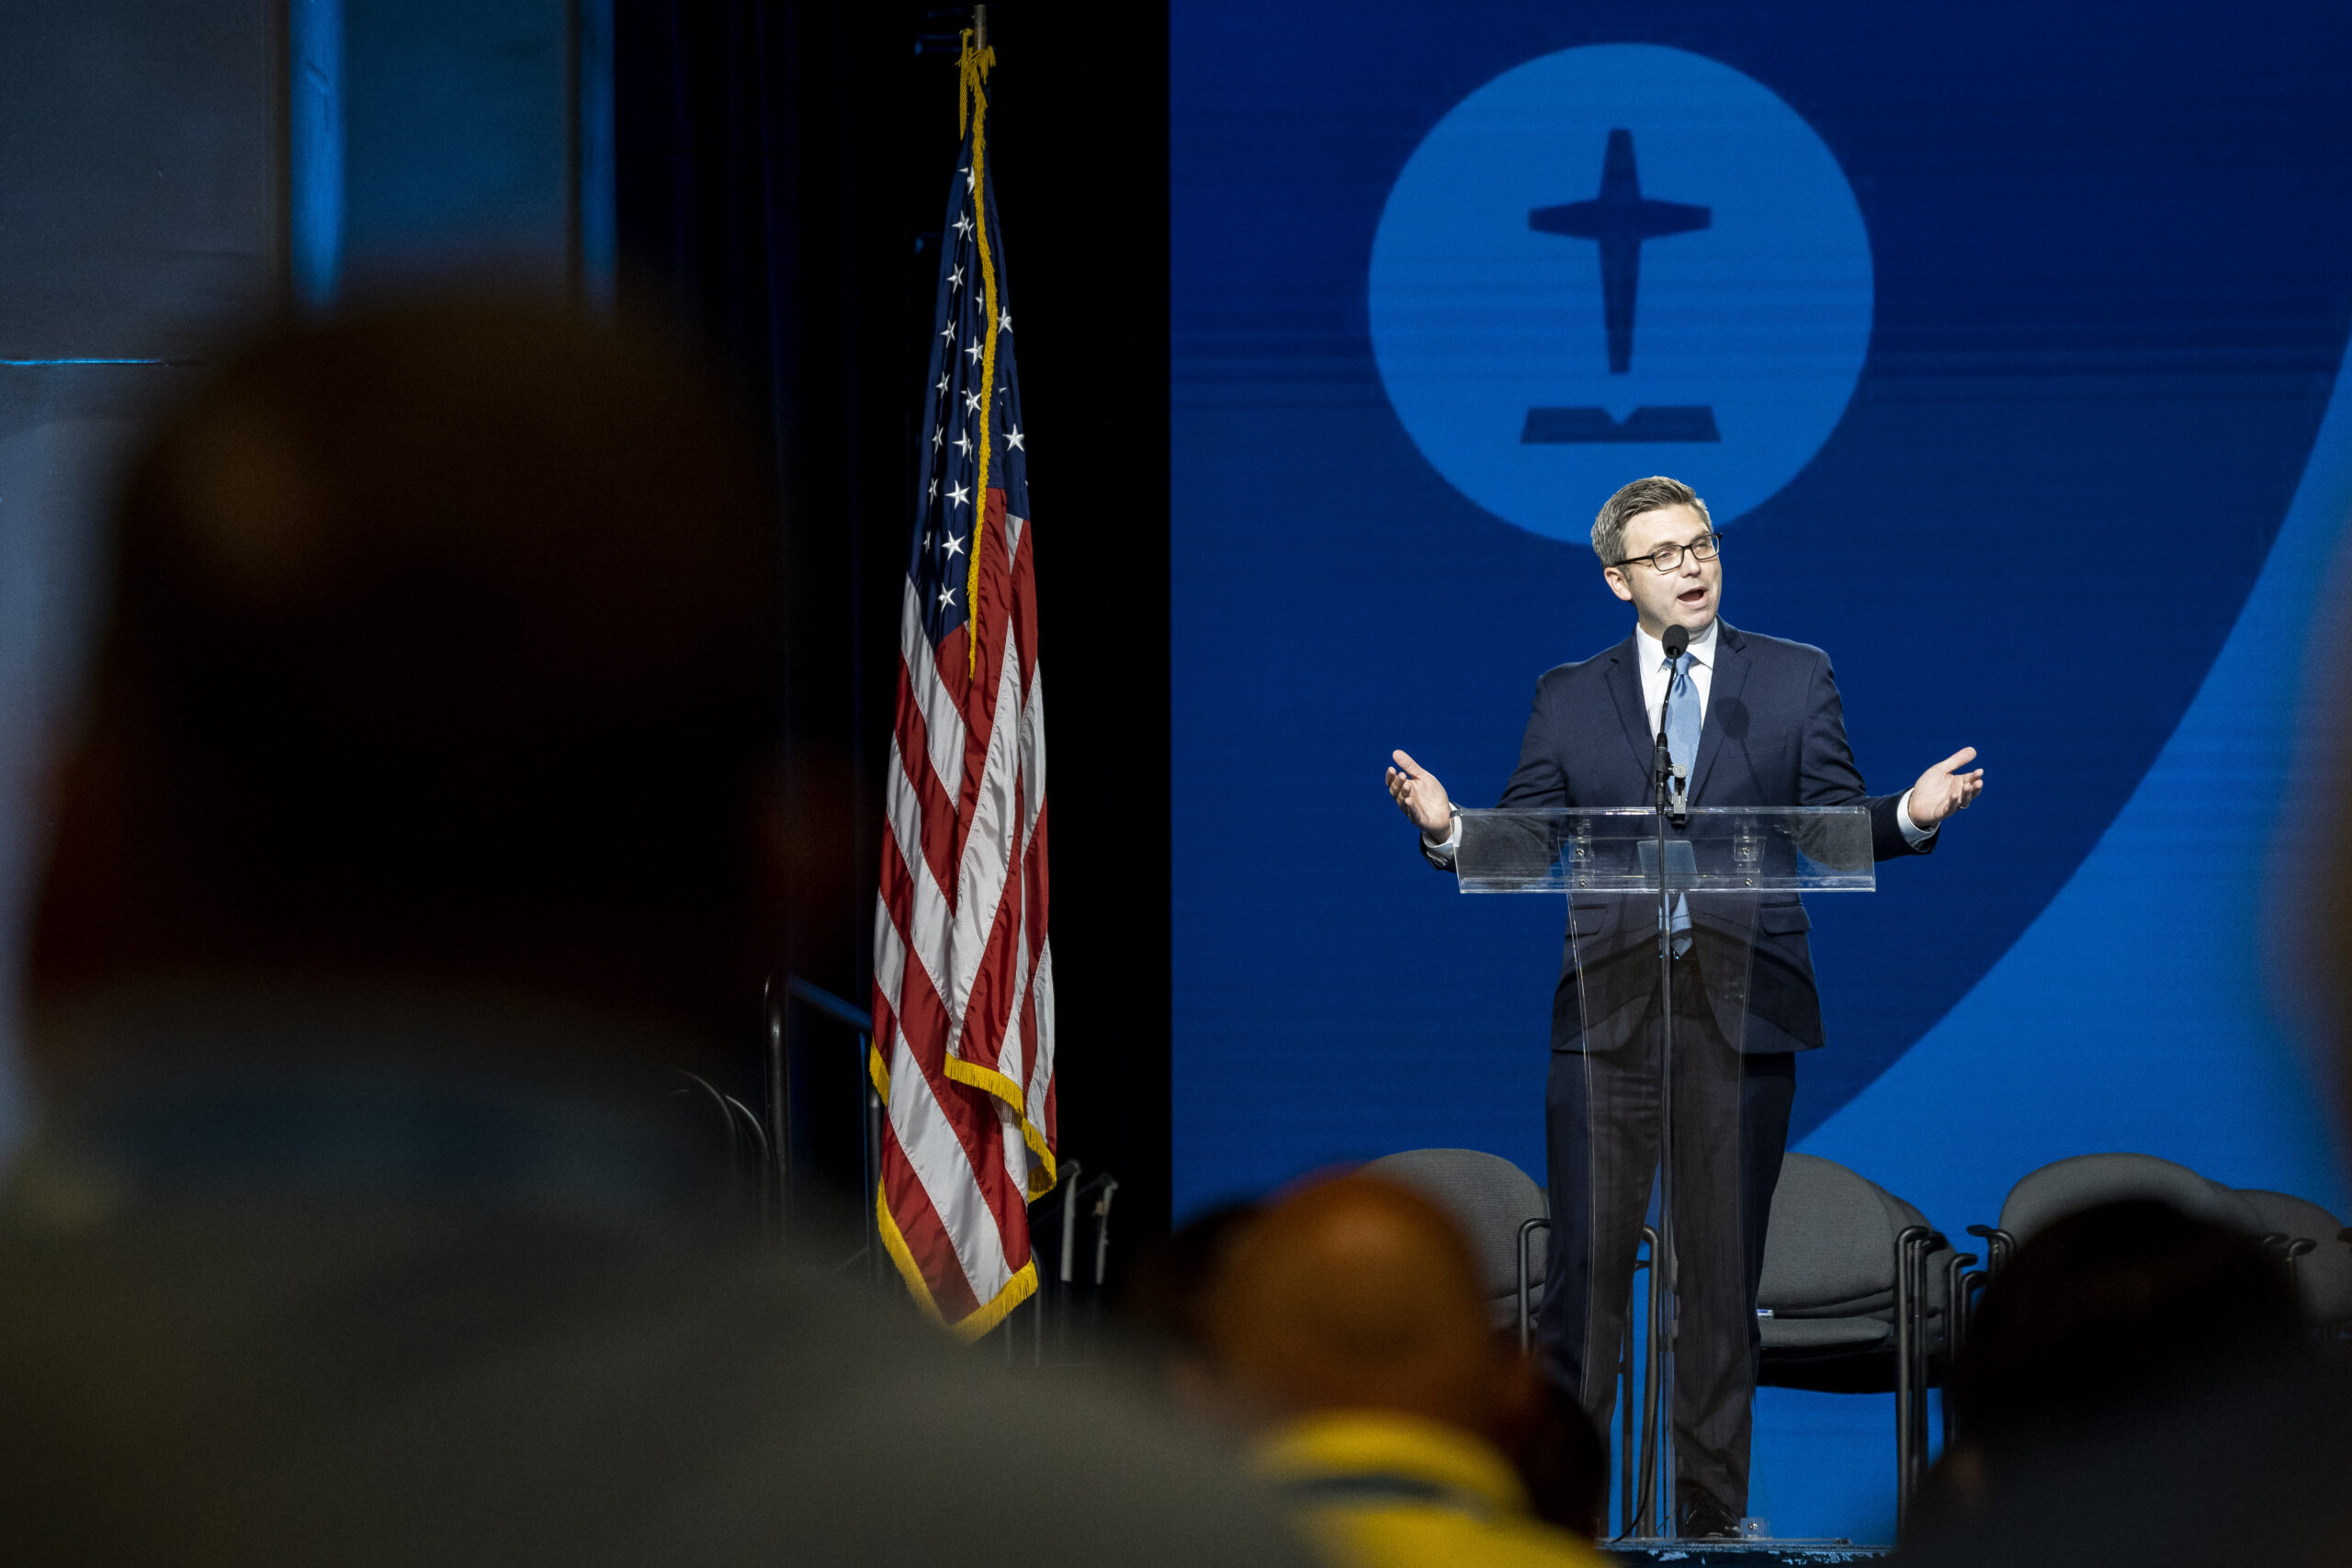 Brent Leatherwood speaks in defense of the Ethic and Religious Liberty Commission at the Southern Baptist Convention annual meeting, held at the Anaheim Convention Center in Anaheim, California, on Wednesday, June 15, 2022. Photo by Justin L. Stewart/Religion News Service